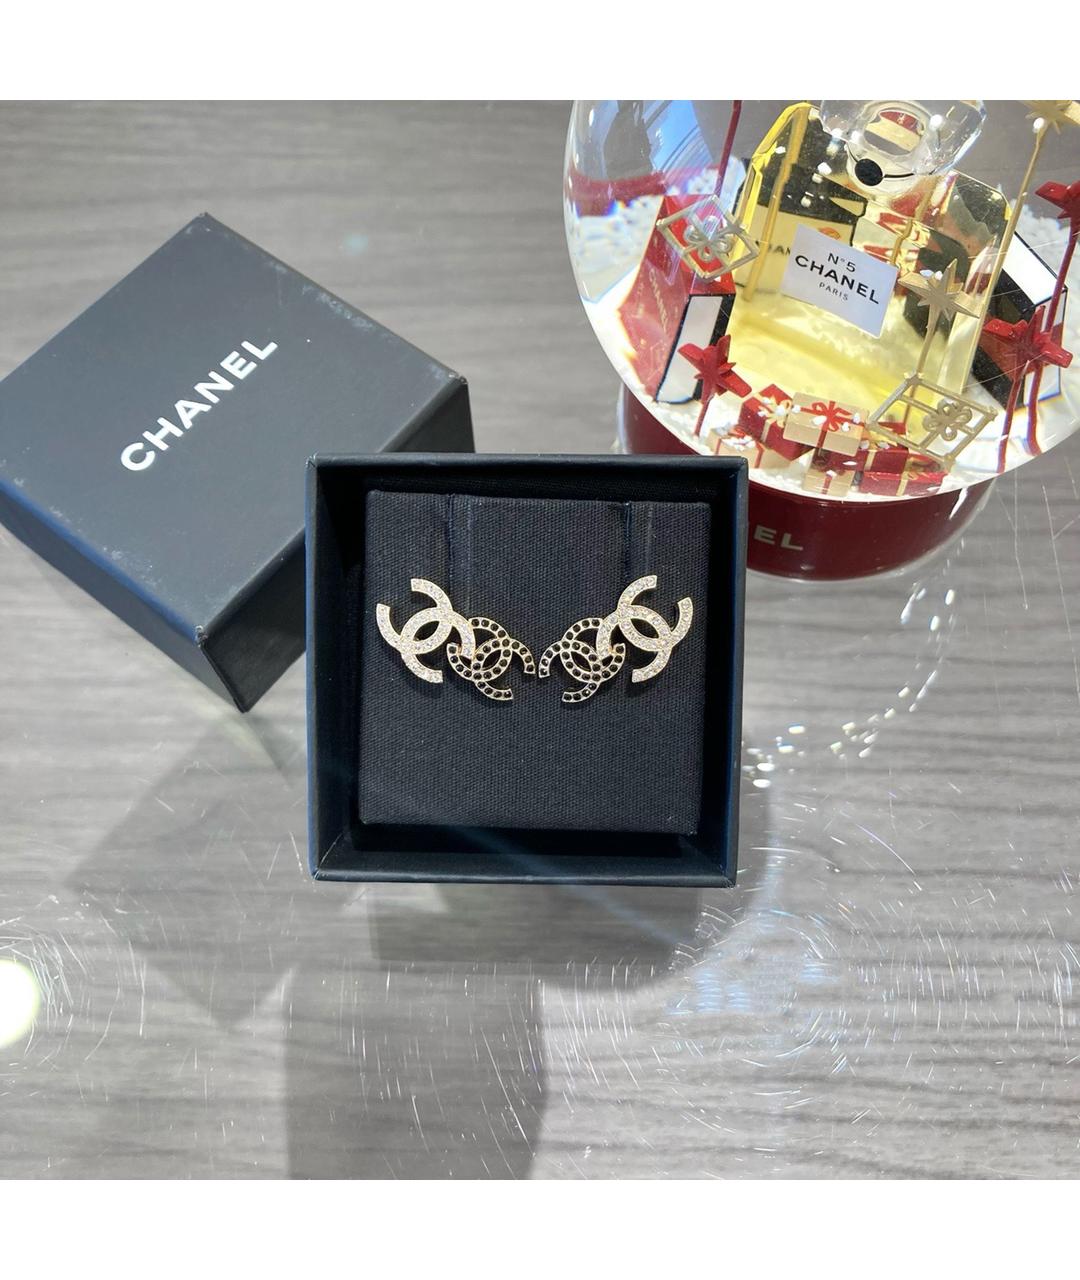 CHANEL PRE-OWNED Серьги, фото 2